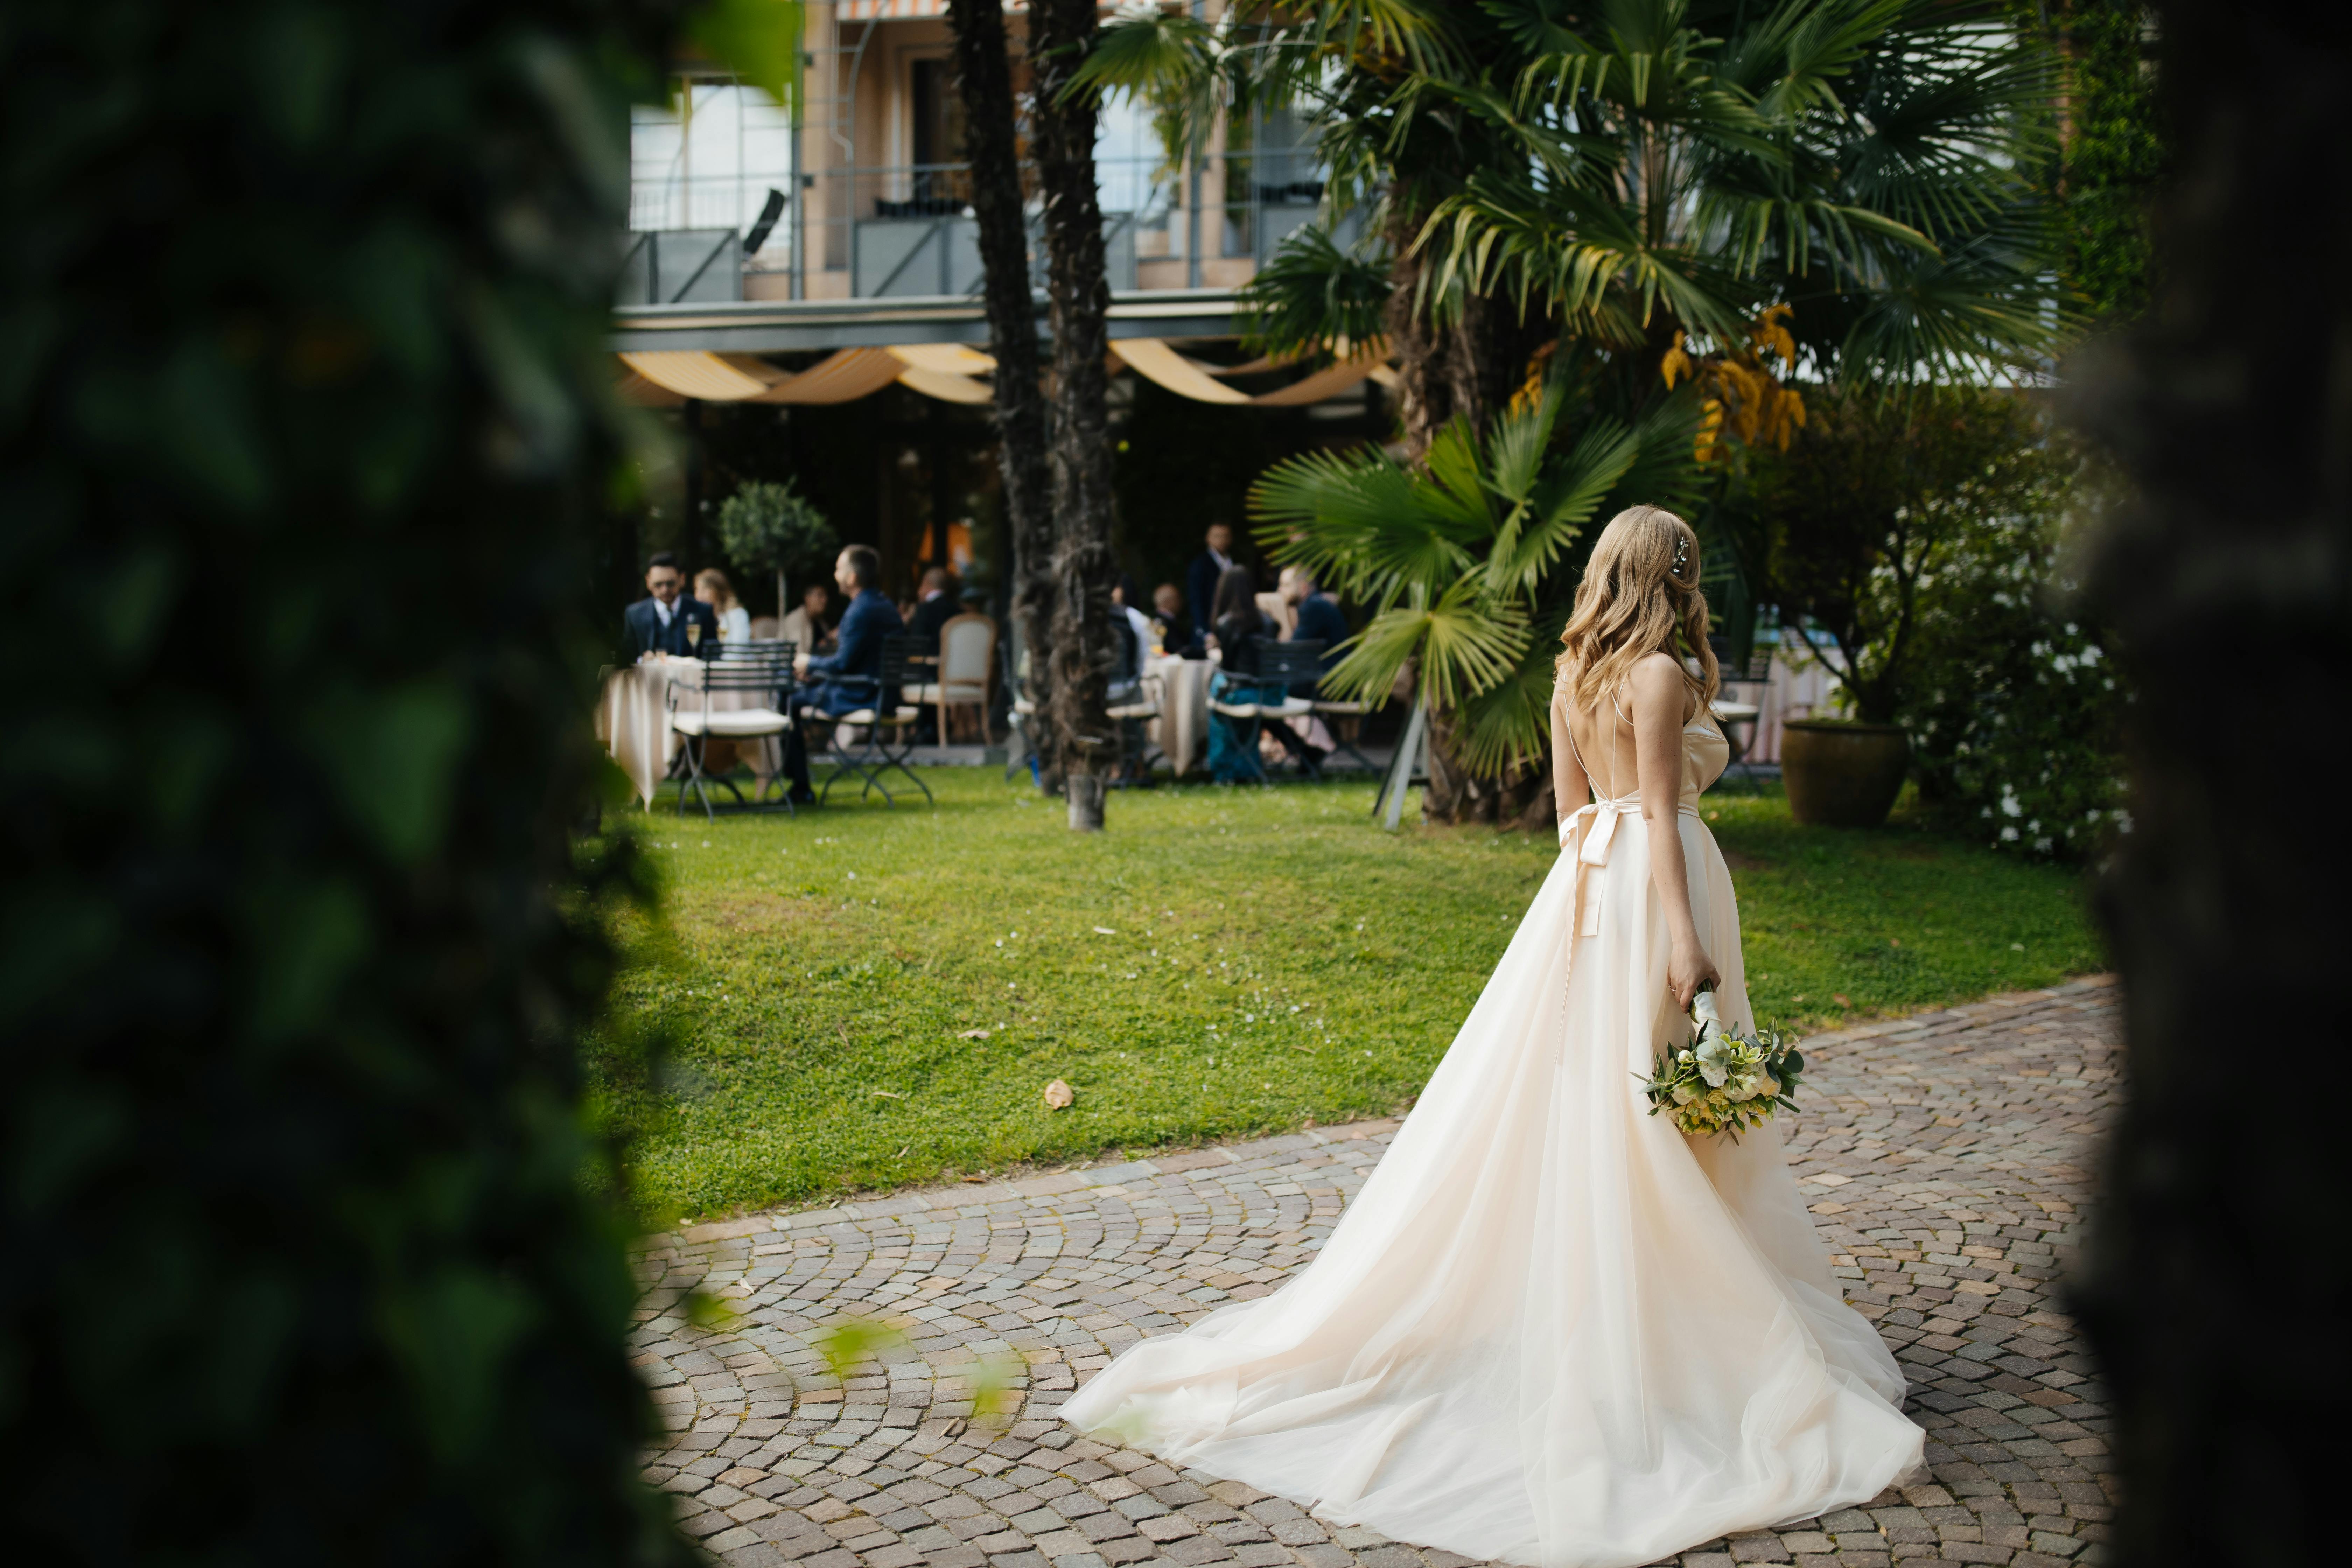 A bride holding a bouquet and walking alone during her wedding day | Source: Pexels